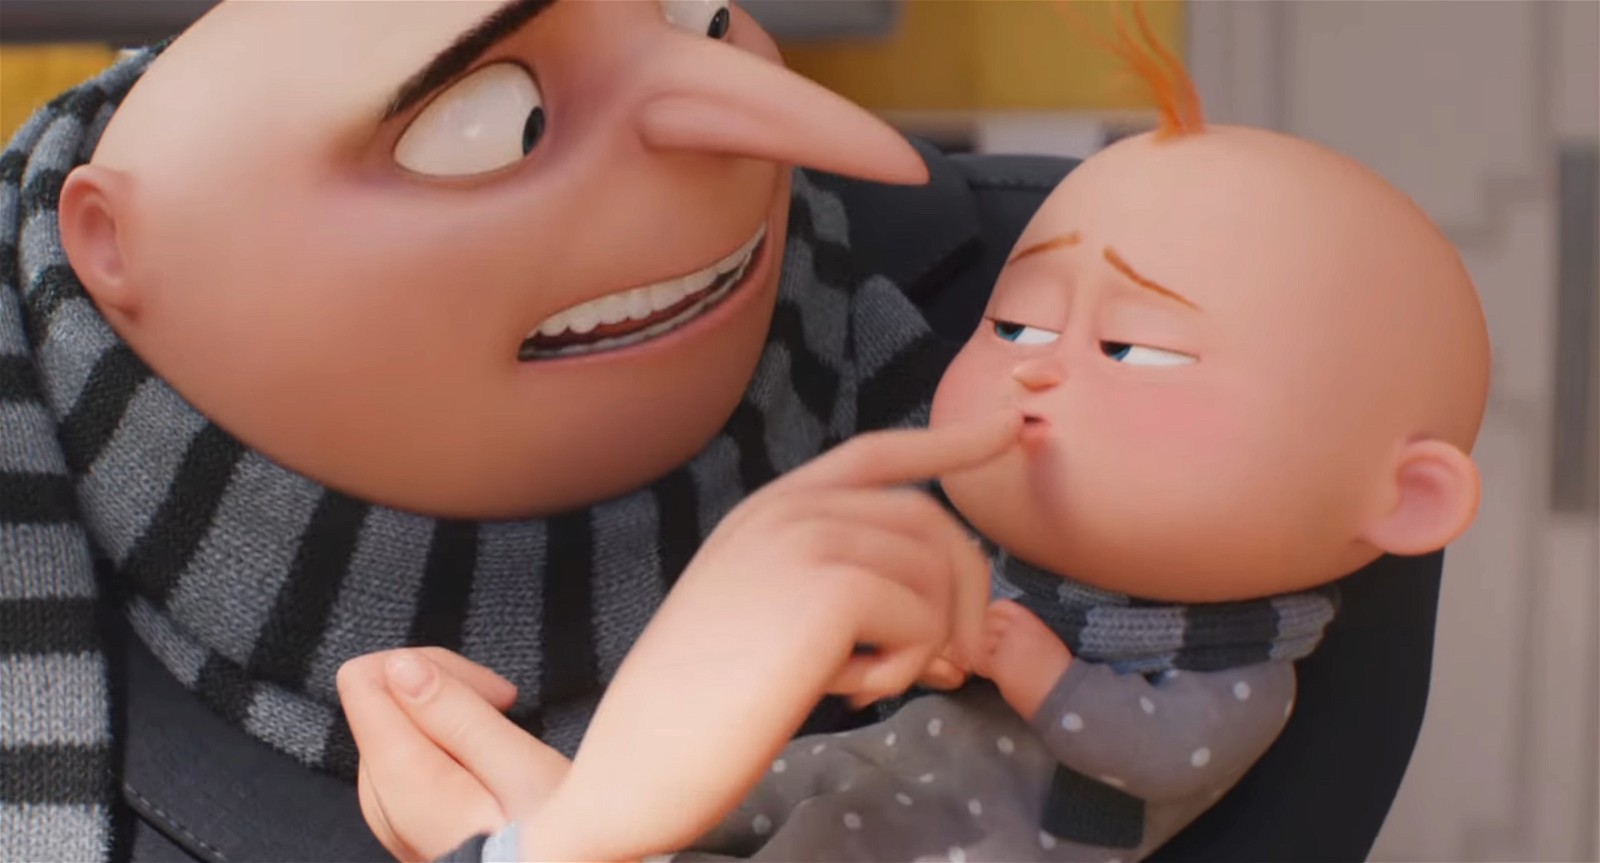 The first look of Gru Jr.